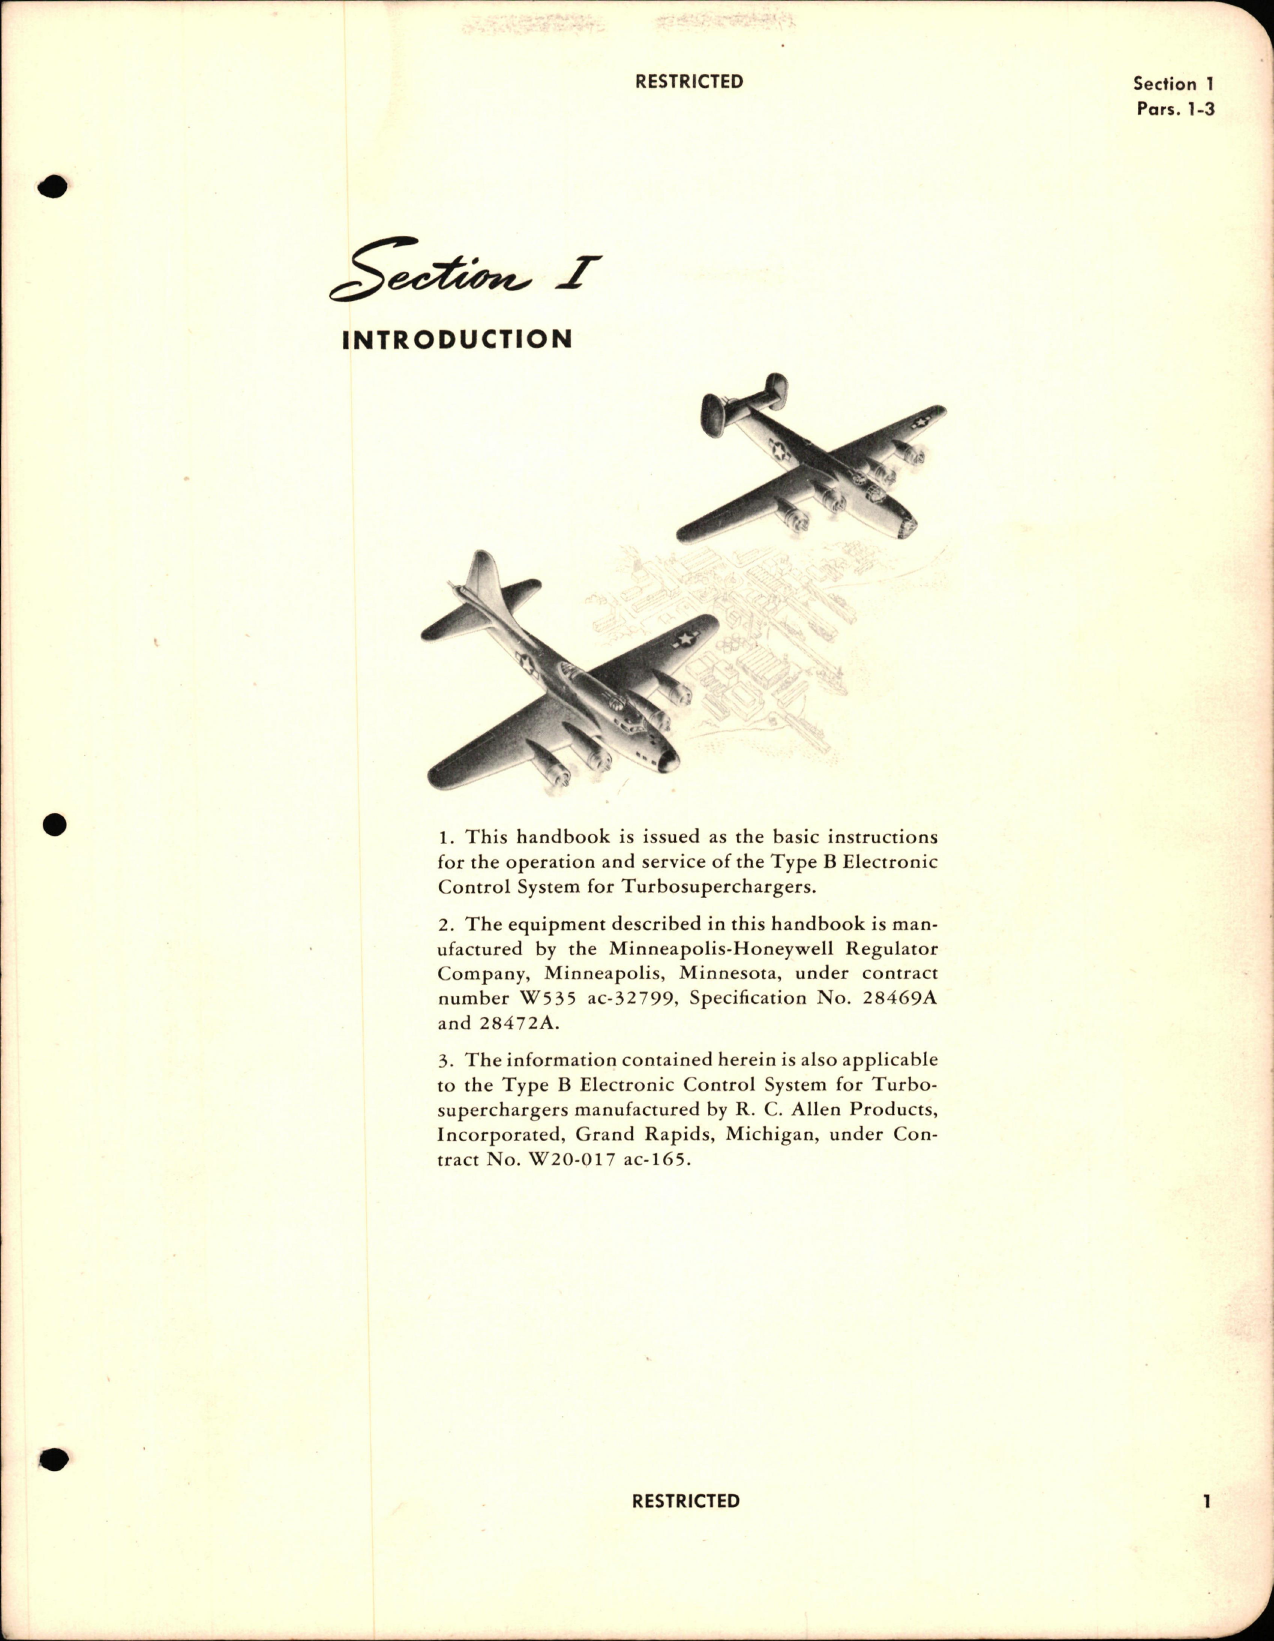 Sample page 5 from AirCorps Library document: Operation and Service Instructions for Electronic Control System Turbosuperchargers Type B